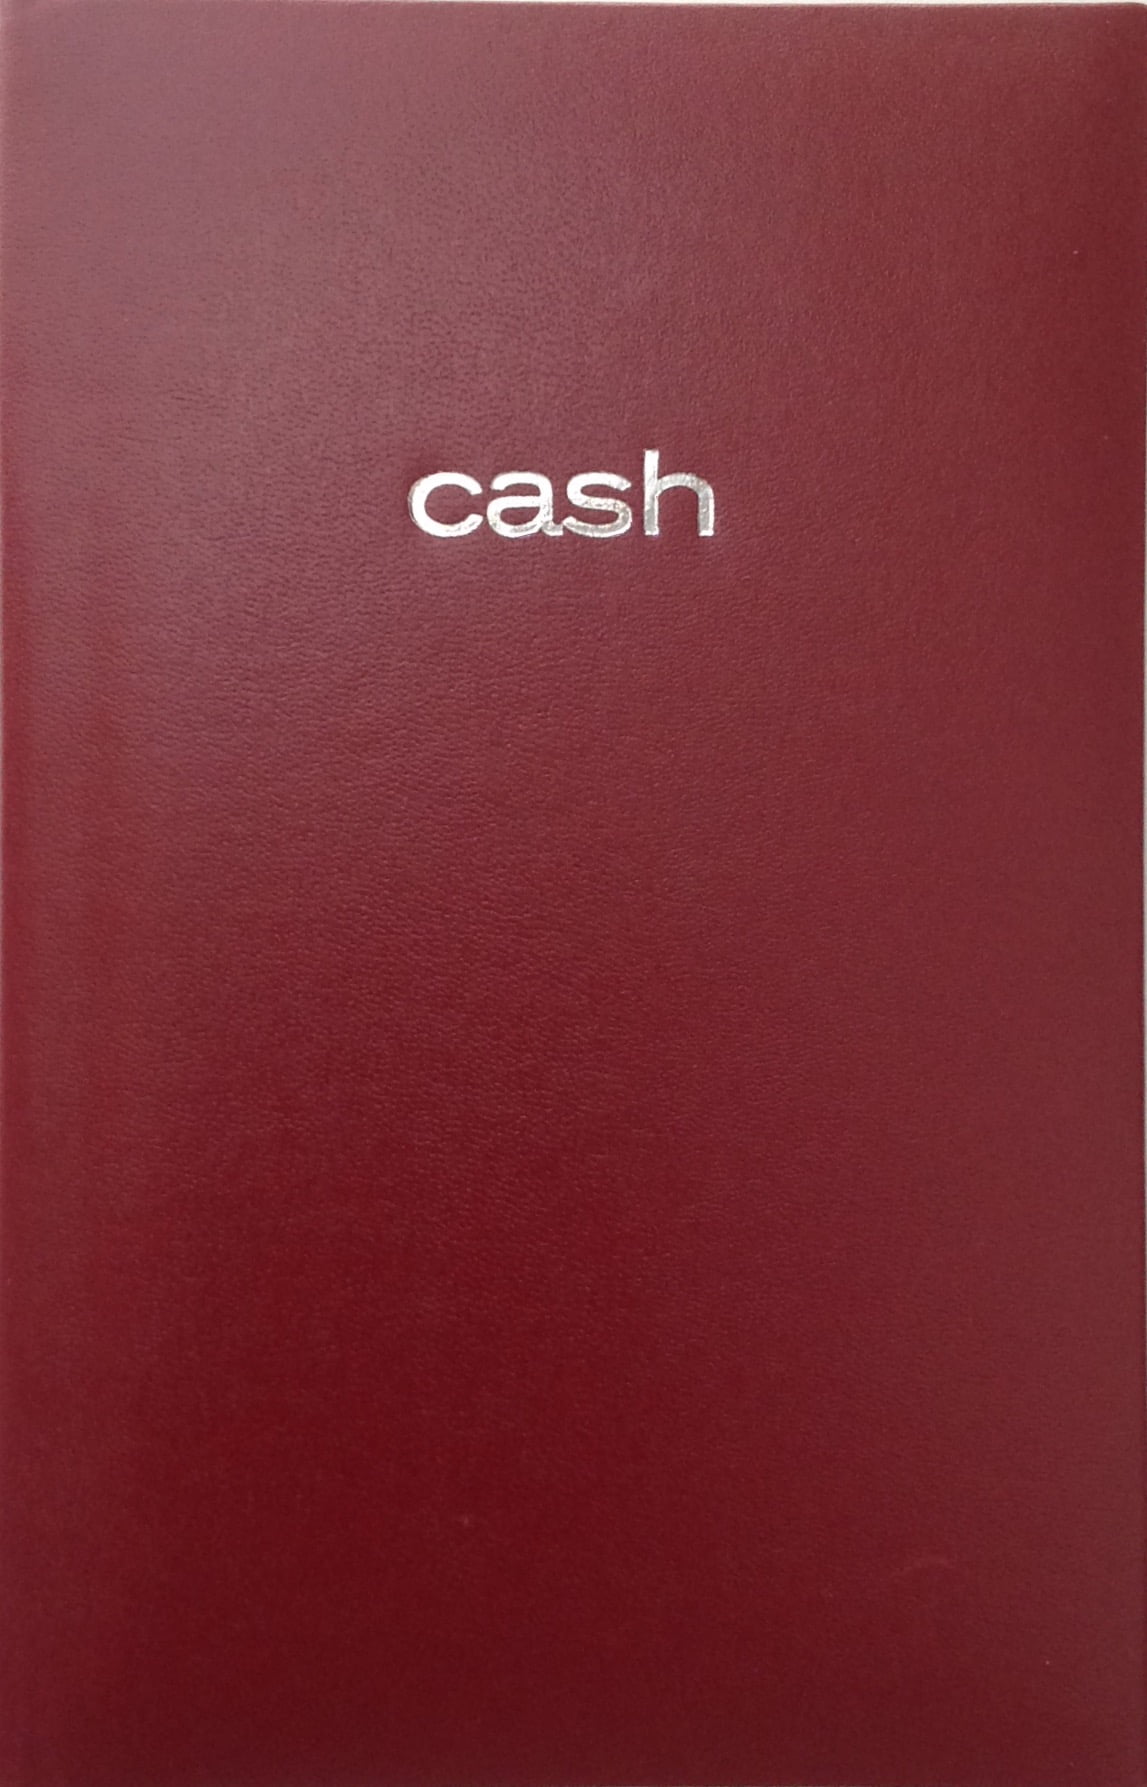 7.9" x 5" Inches ... Set of 2 Cash Books 144 Pages per Book Hardbound Cover 